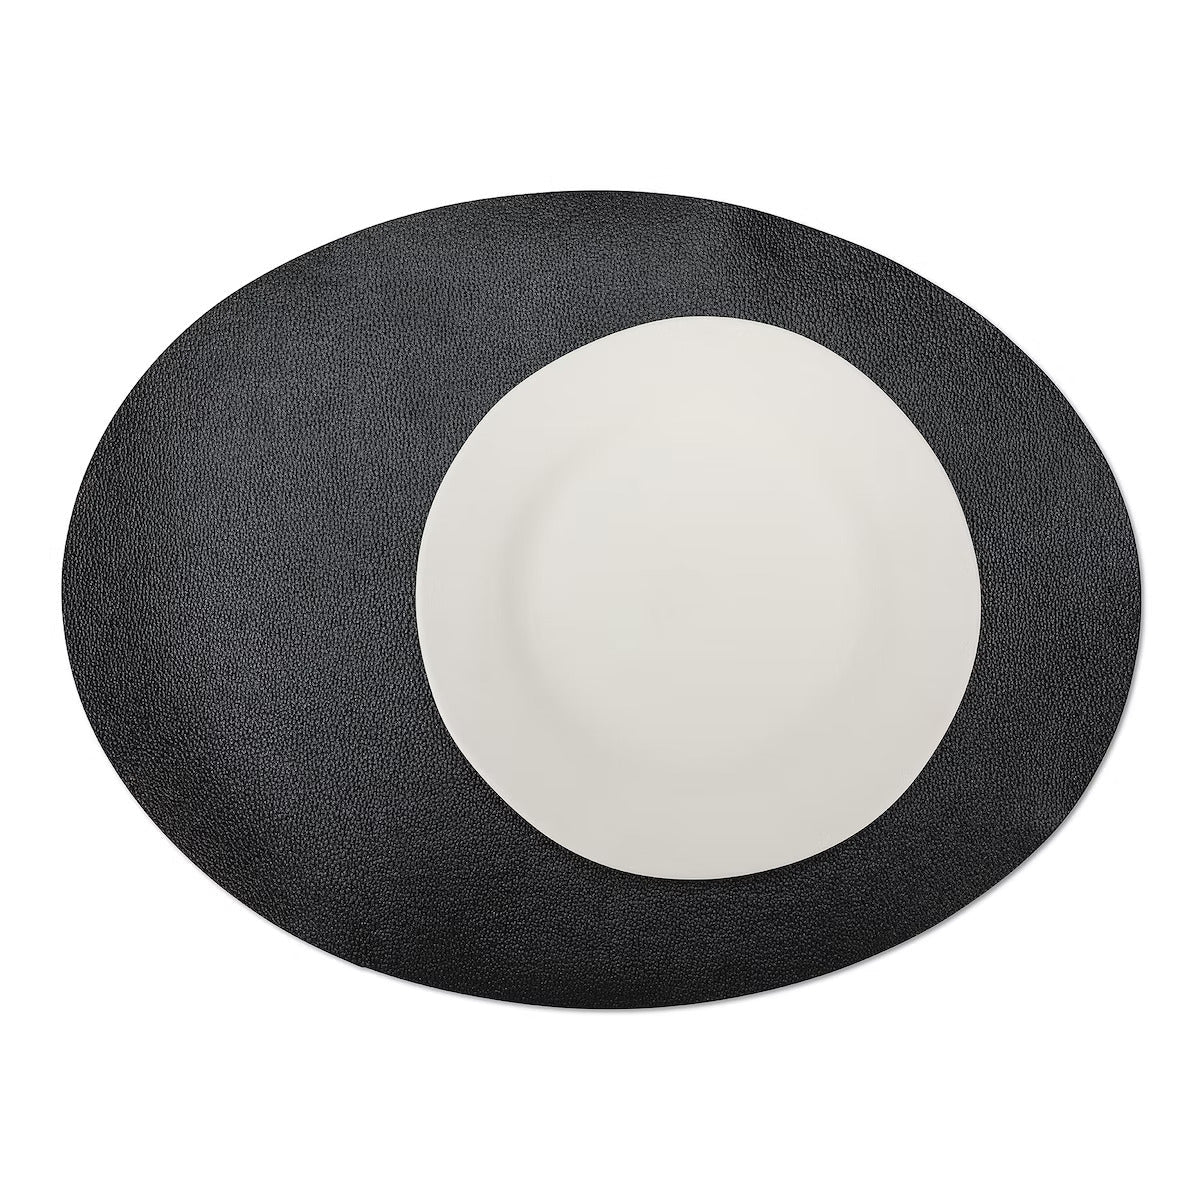 A large oval textured washable paper placemat in black is shown under a white plate.